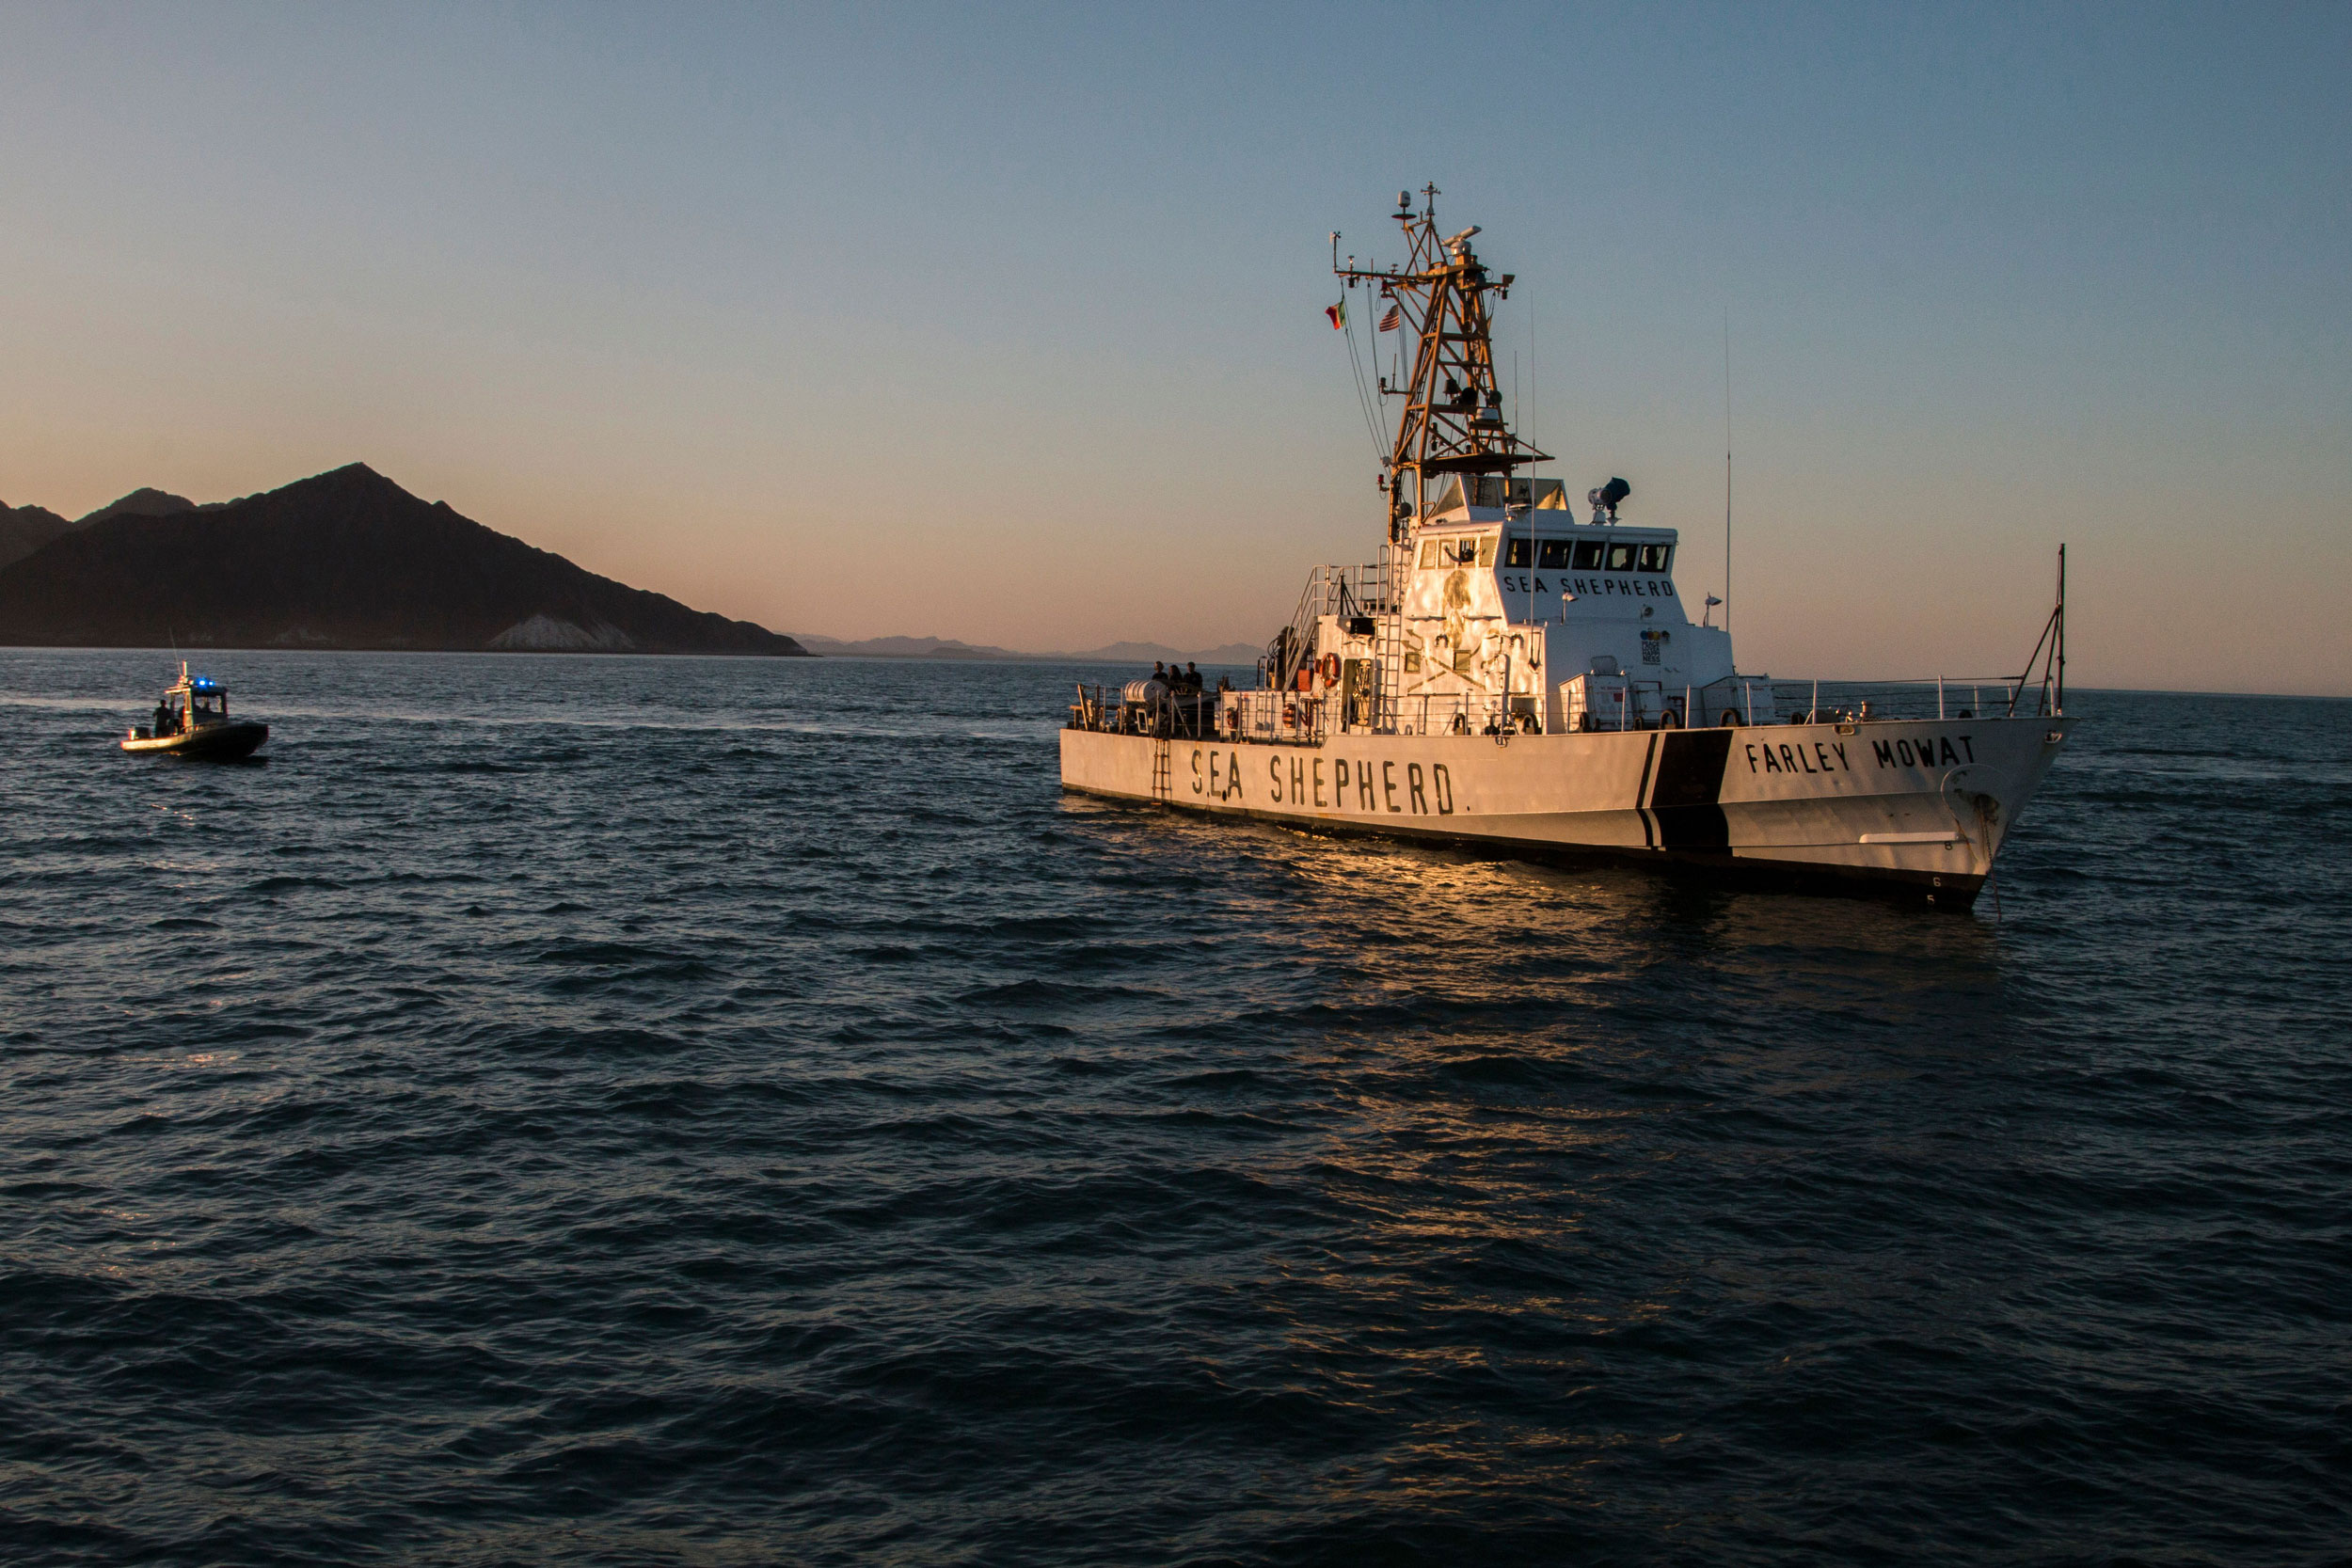 With approval from the Mexican government, the Sea Shepherd Conservation Society has been patrolling the Gulf of California since early 2015, monitoring totoaba poaching and later collecting illegal gill nets that can ensnare vaquitas and a variety of other wildlife. Photo by Hector Guerrero/AFP/Getty Images